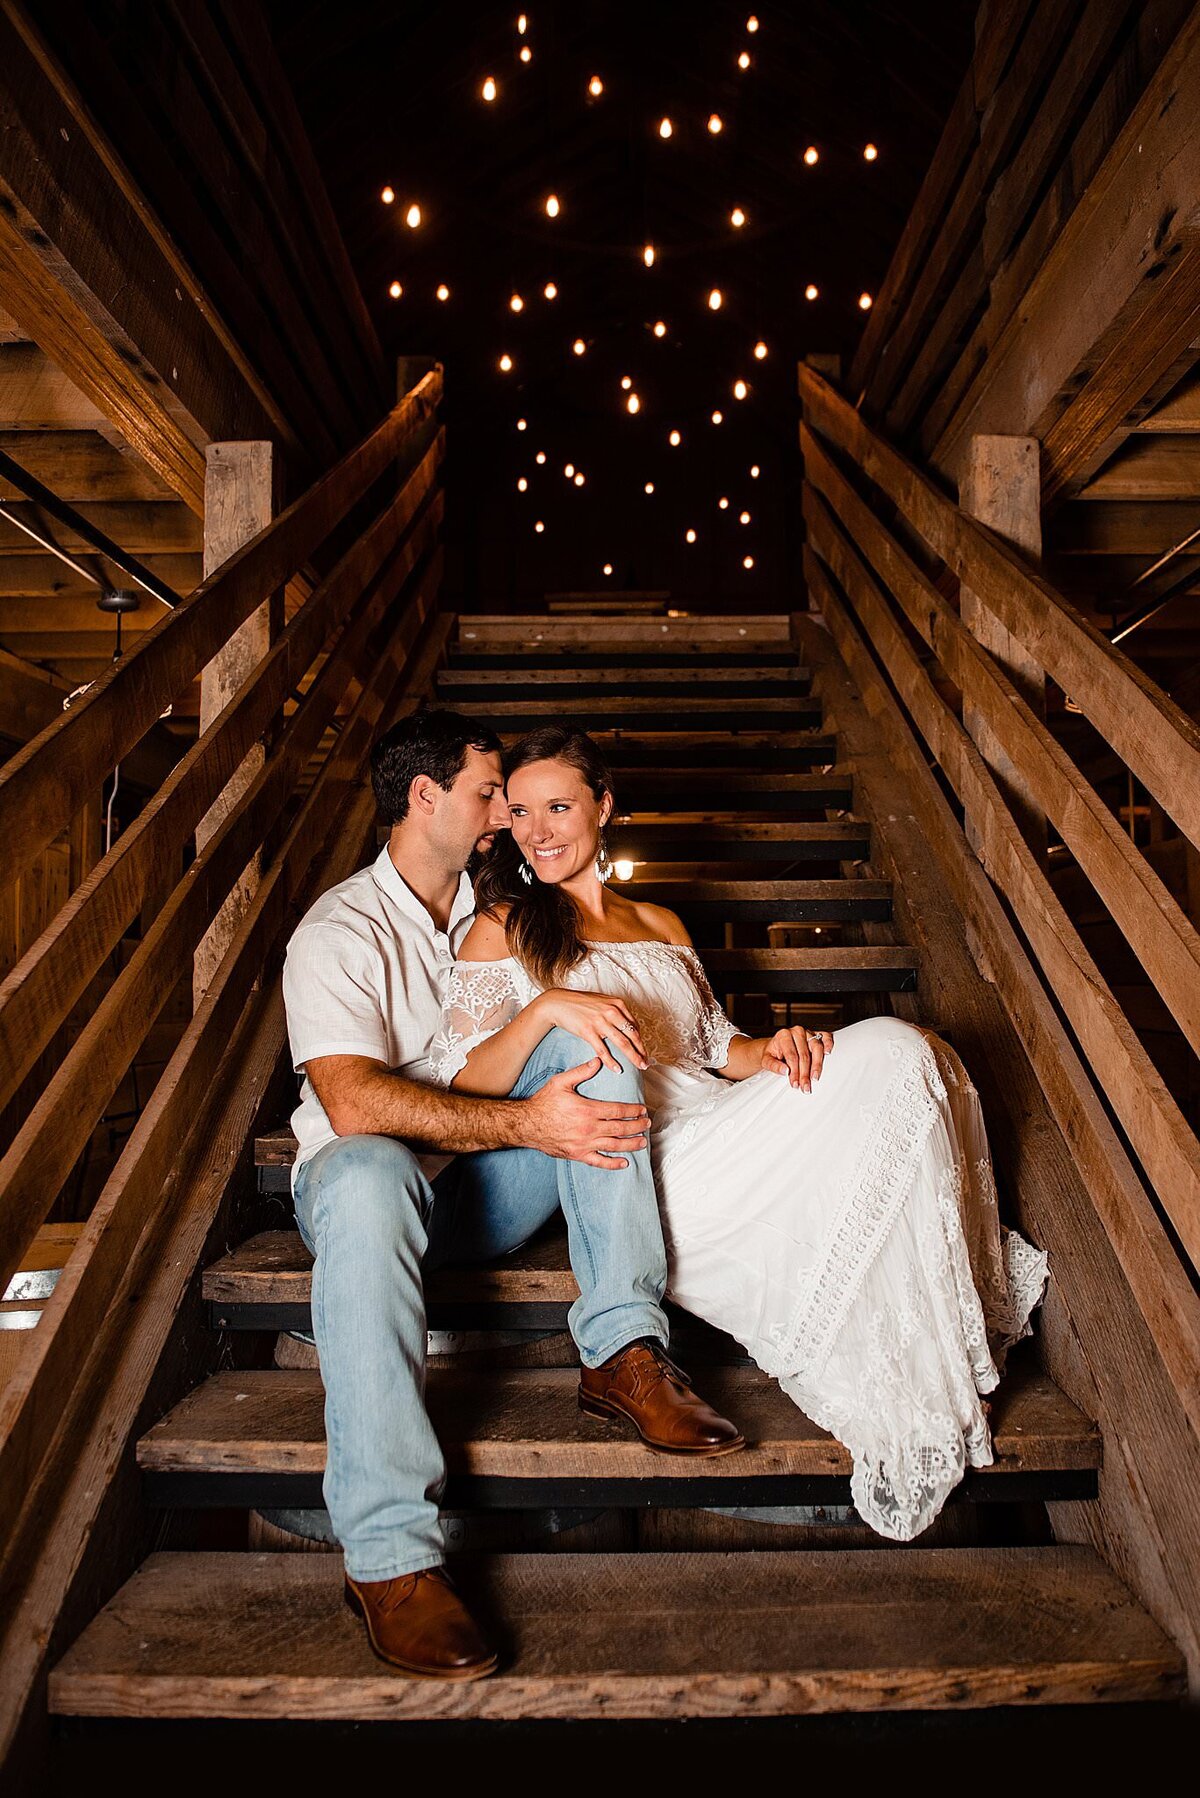 Couple sitting together on the stairs inside of Arrington Vineyards big red barn, twinkly light chandeliers above them